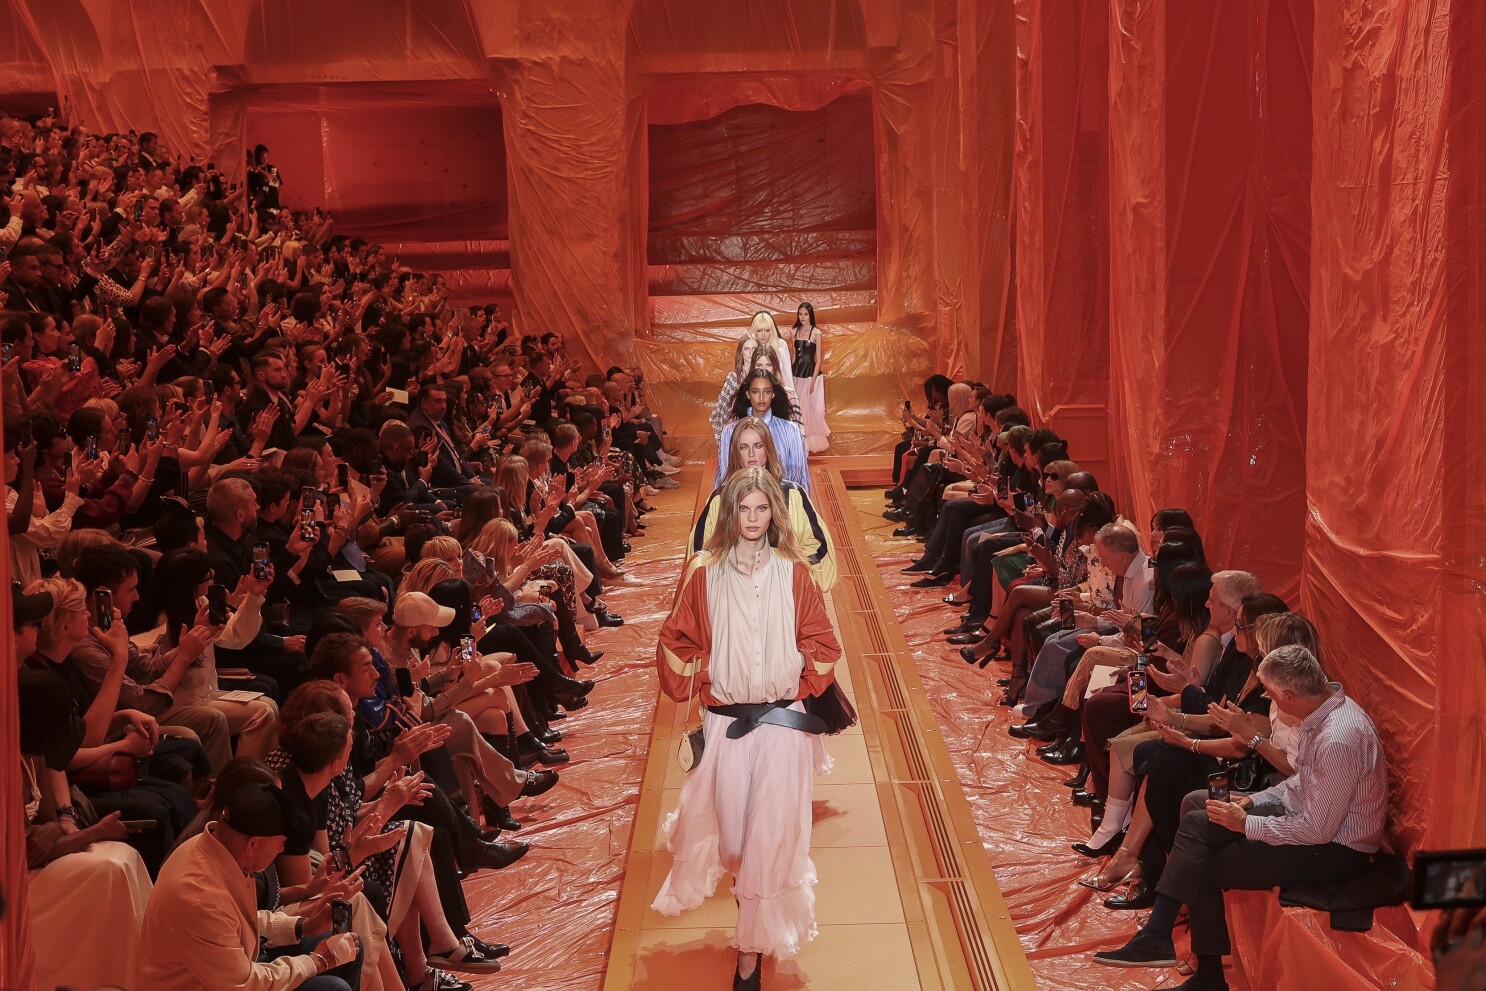 French Limestone & Sustainability Set the Stage for Louis Vuitton